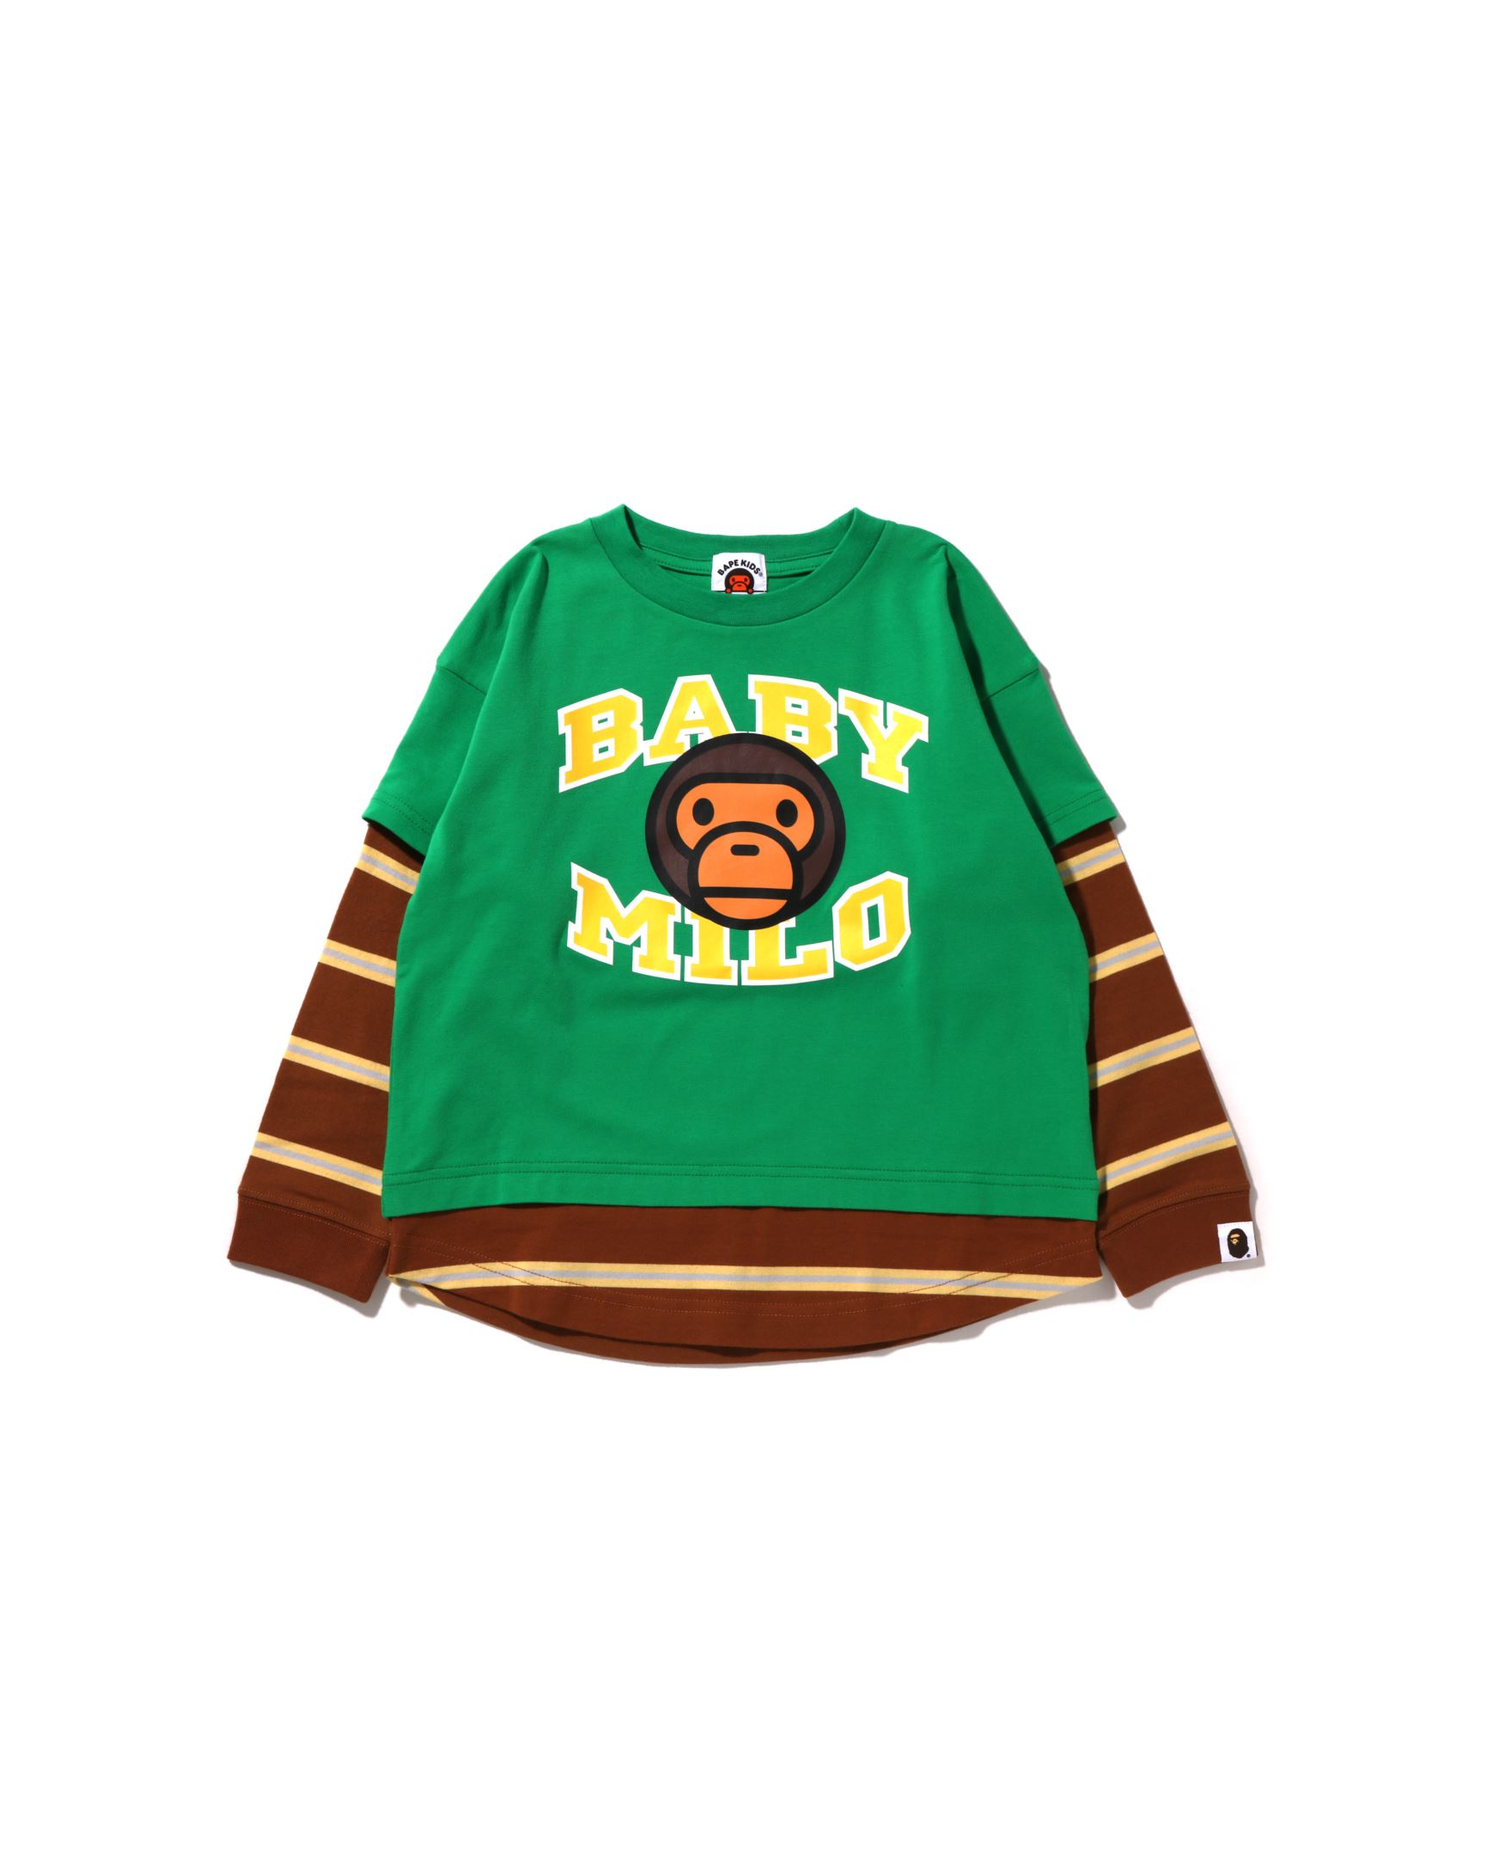 Shop Baby Milo College Layered Loose Fit L/S Tee Online | BAPE